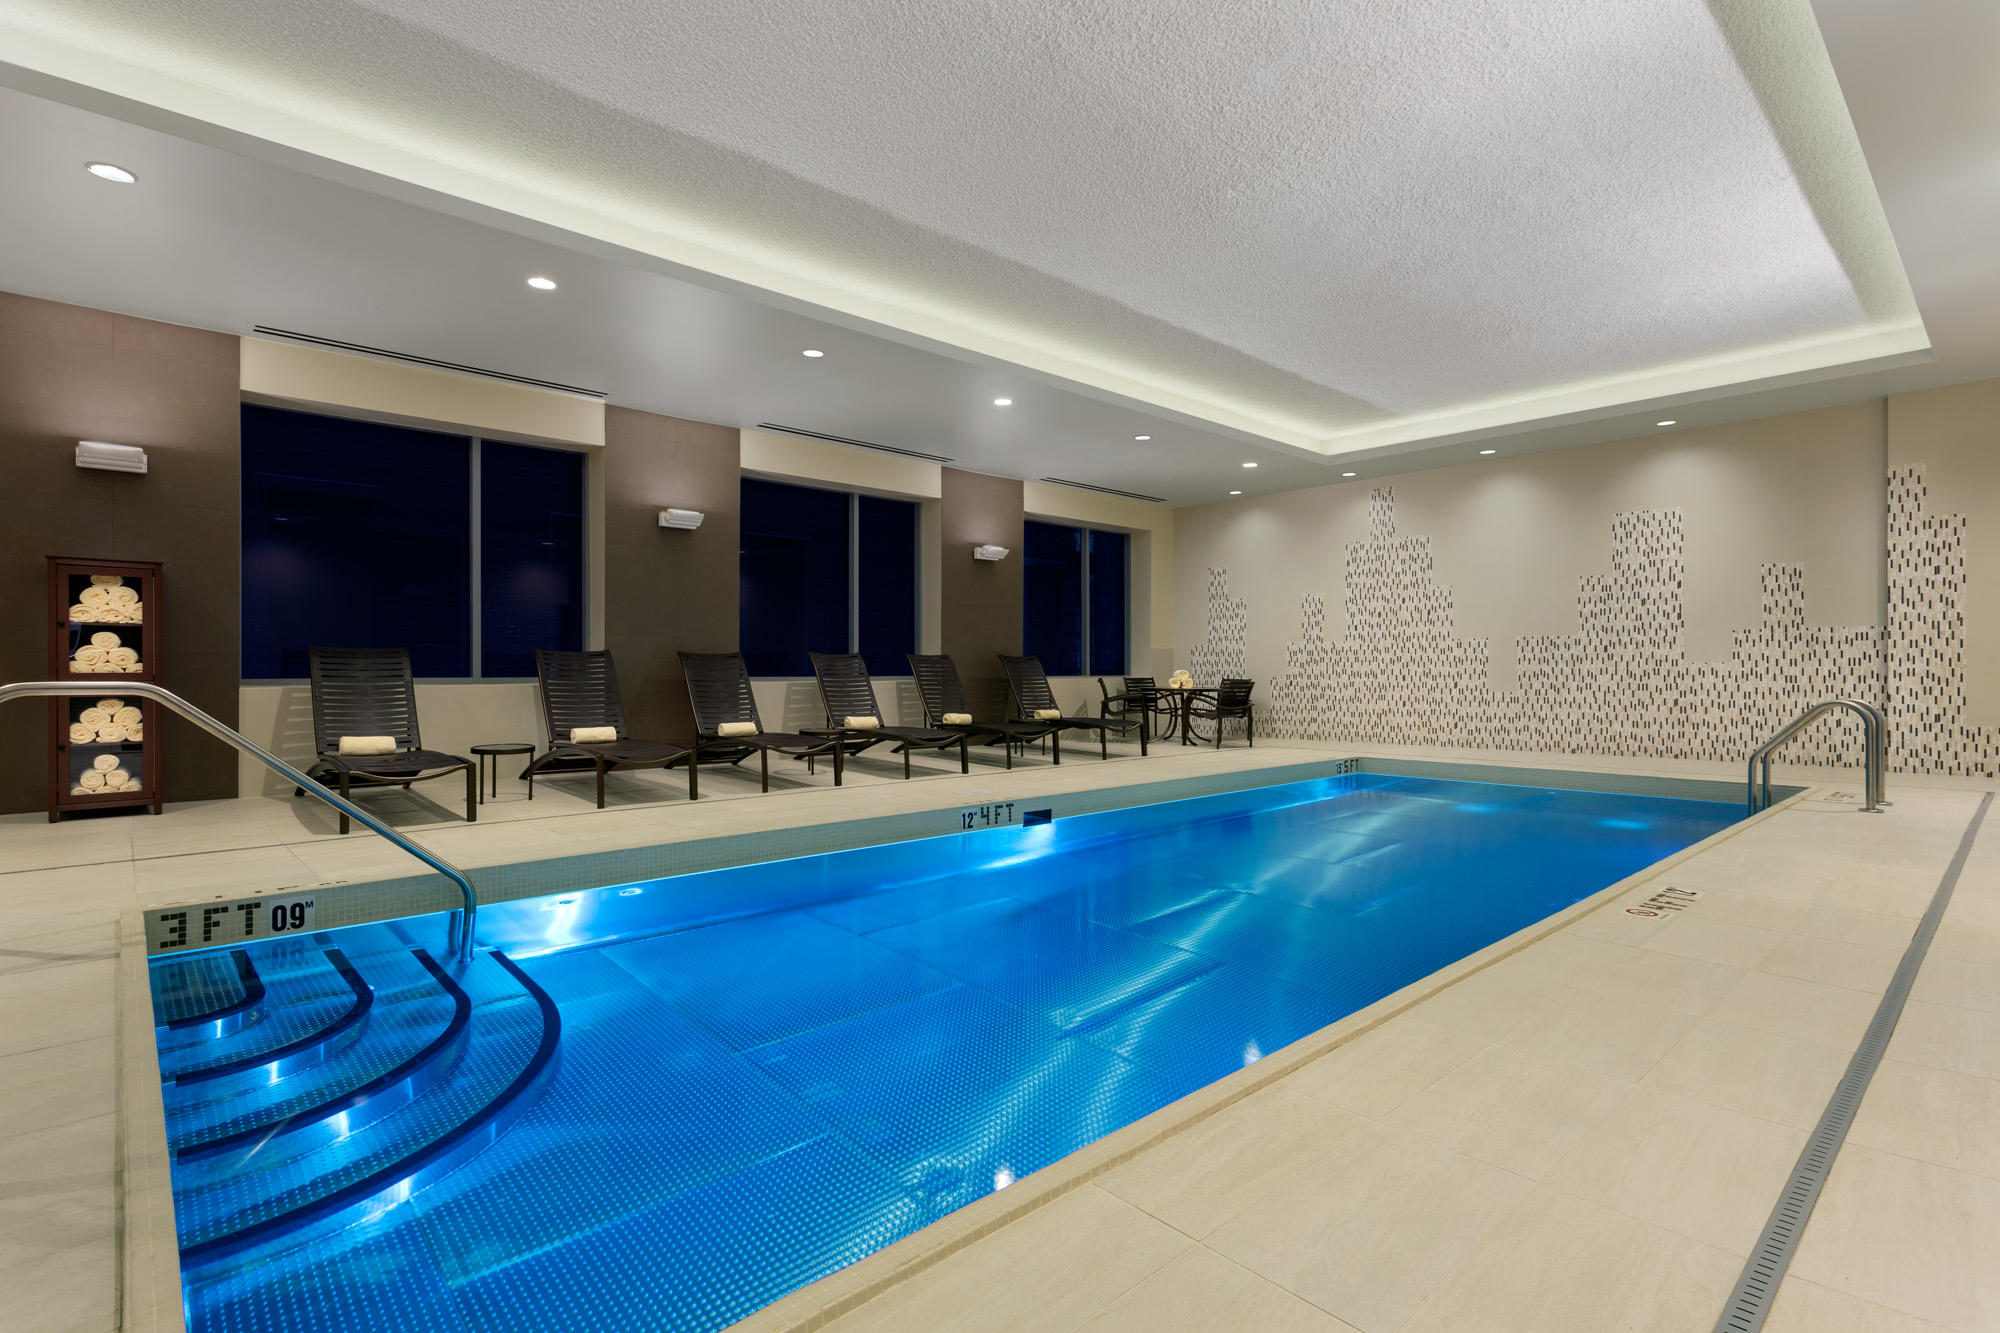 Swim laps or simply relax in the indoor heated pool at the Hyatt Place Chicago/Downtown-The Loop.